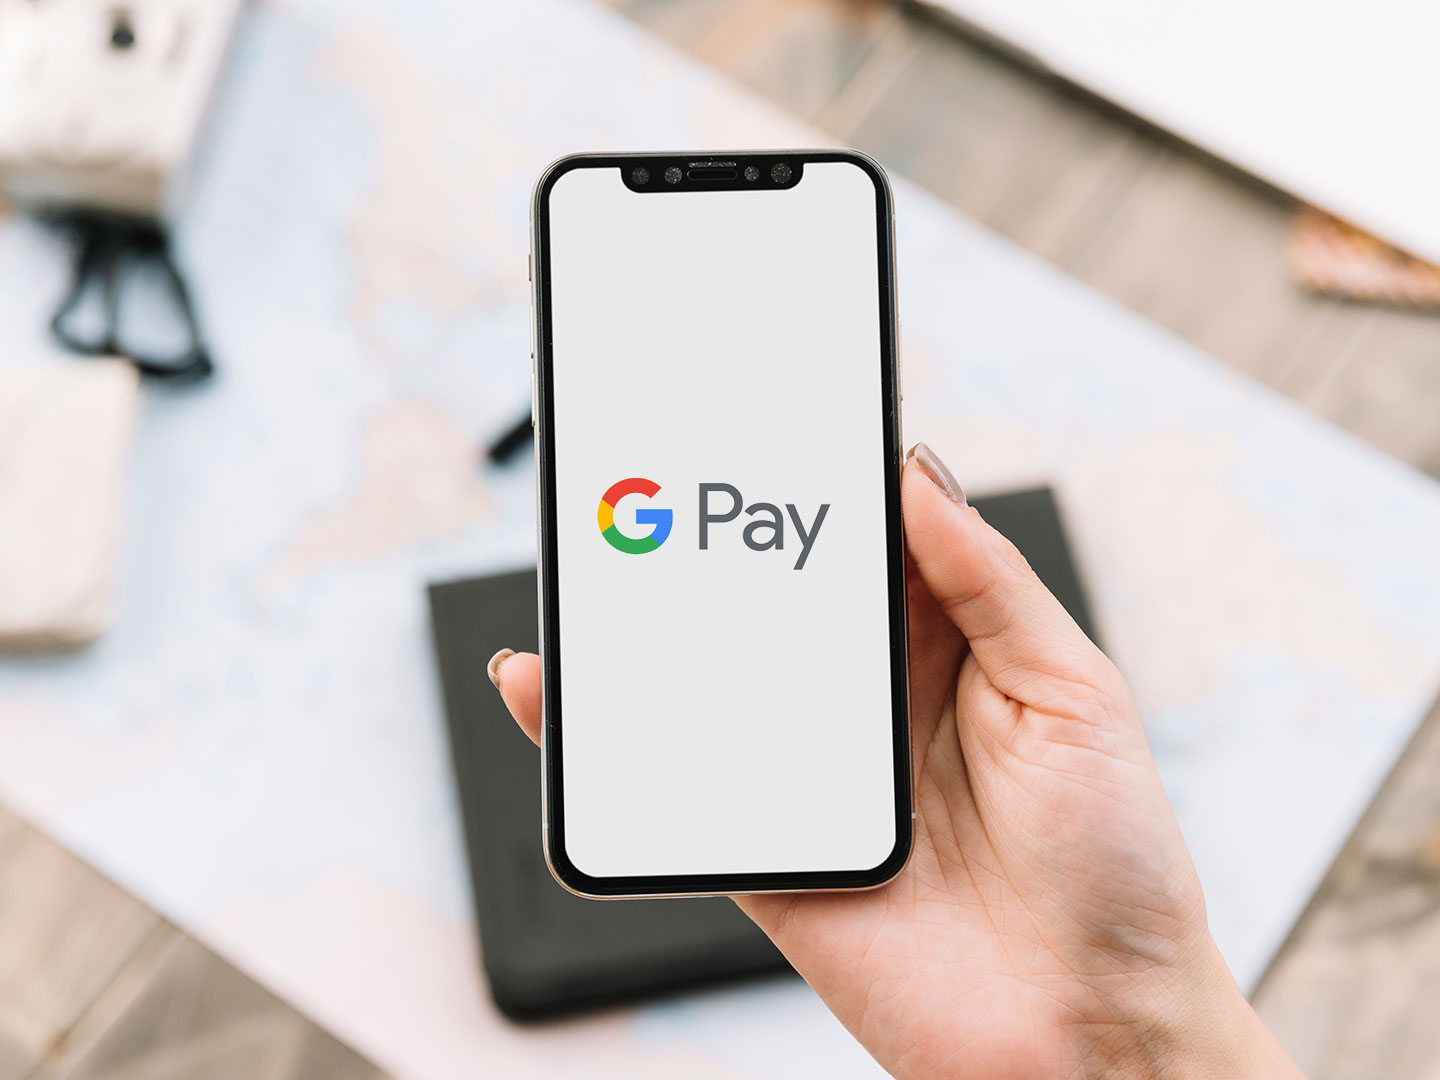 Google Pay introduces tap-to-pay feature for SBI card holders - tscfm.org